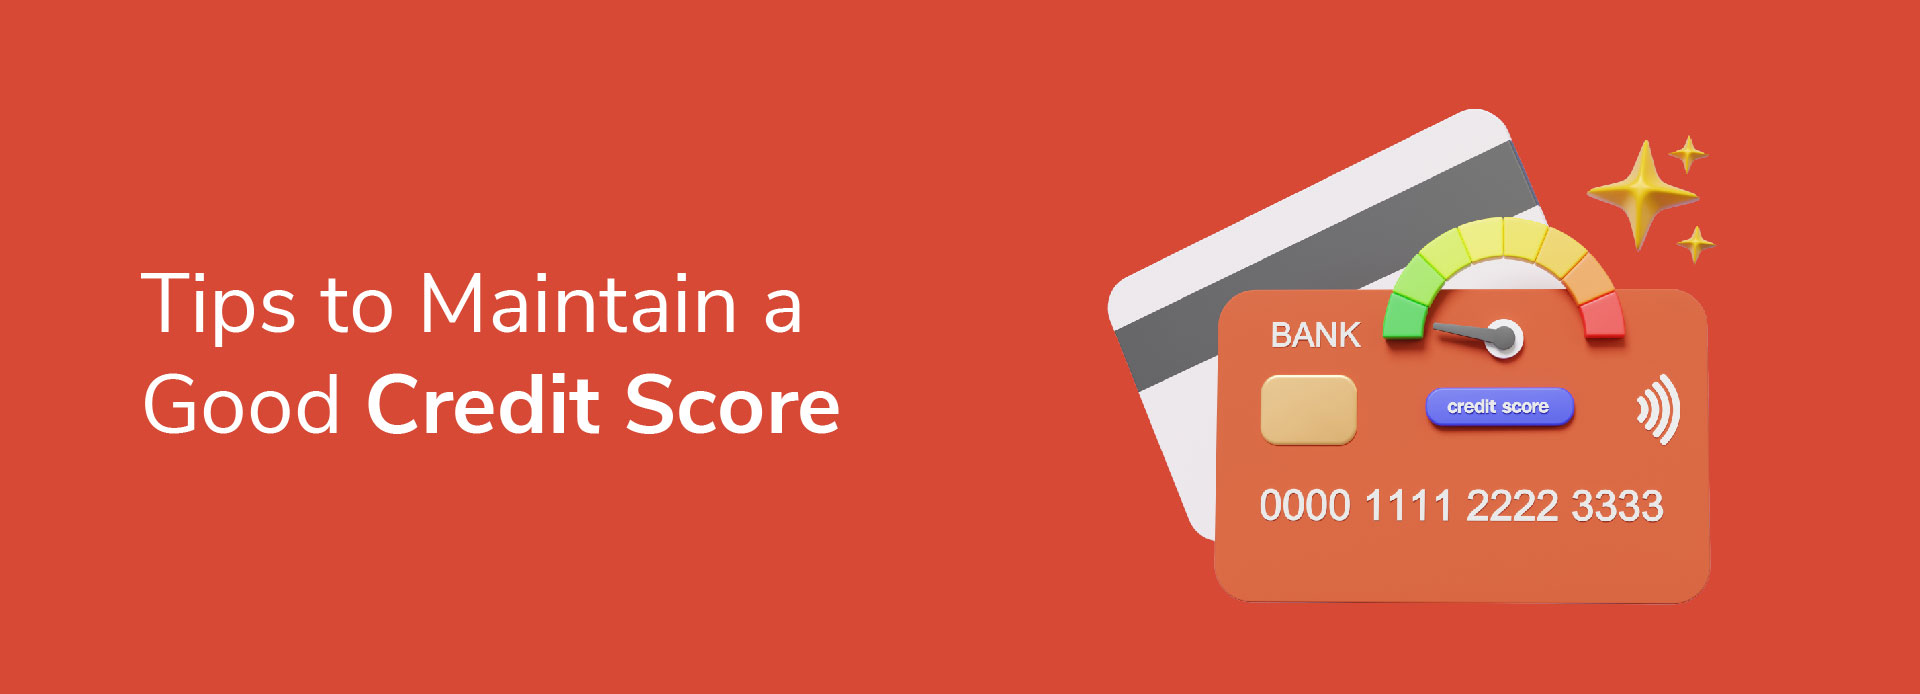 How to Maintain a Good Credit Score (5 Best Habits)